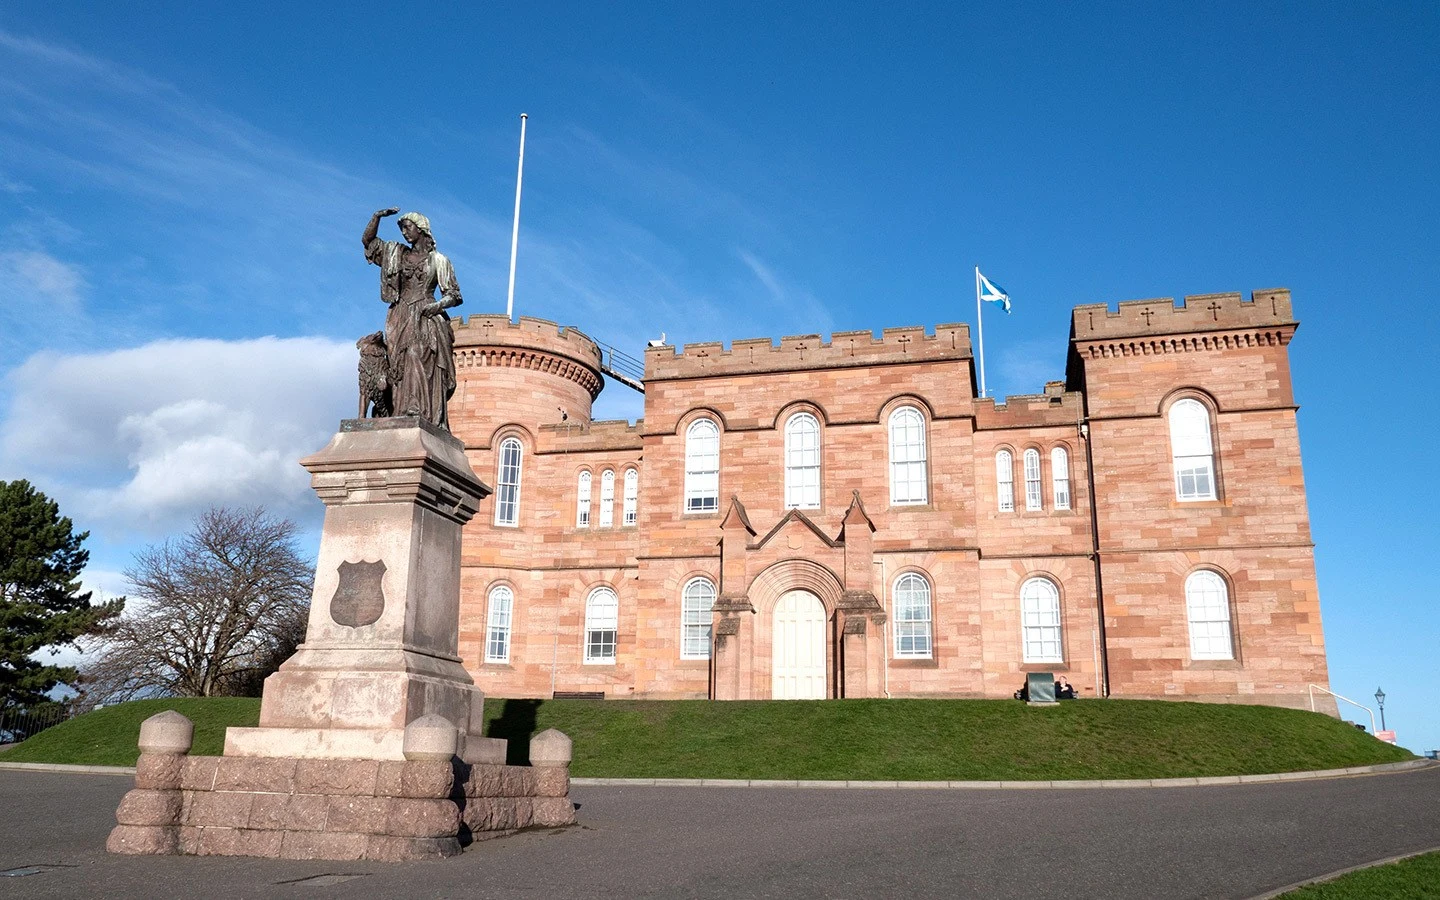 Outside Inverness Castle and statue of Flora MacDonald